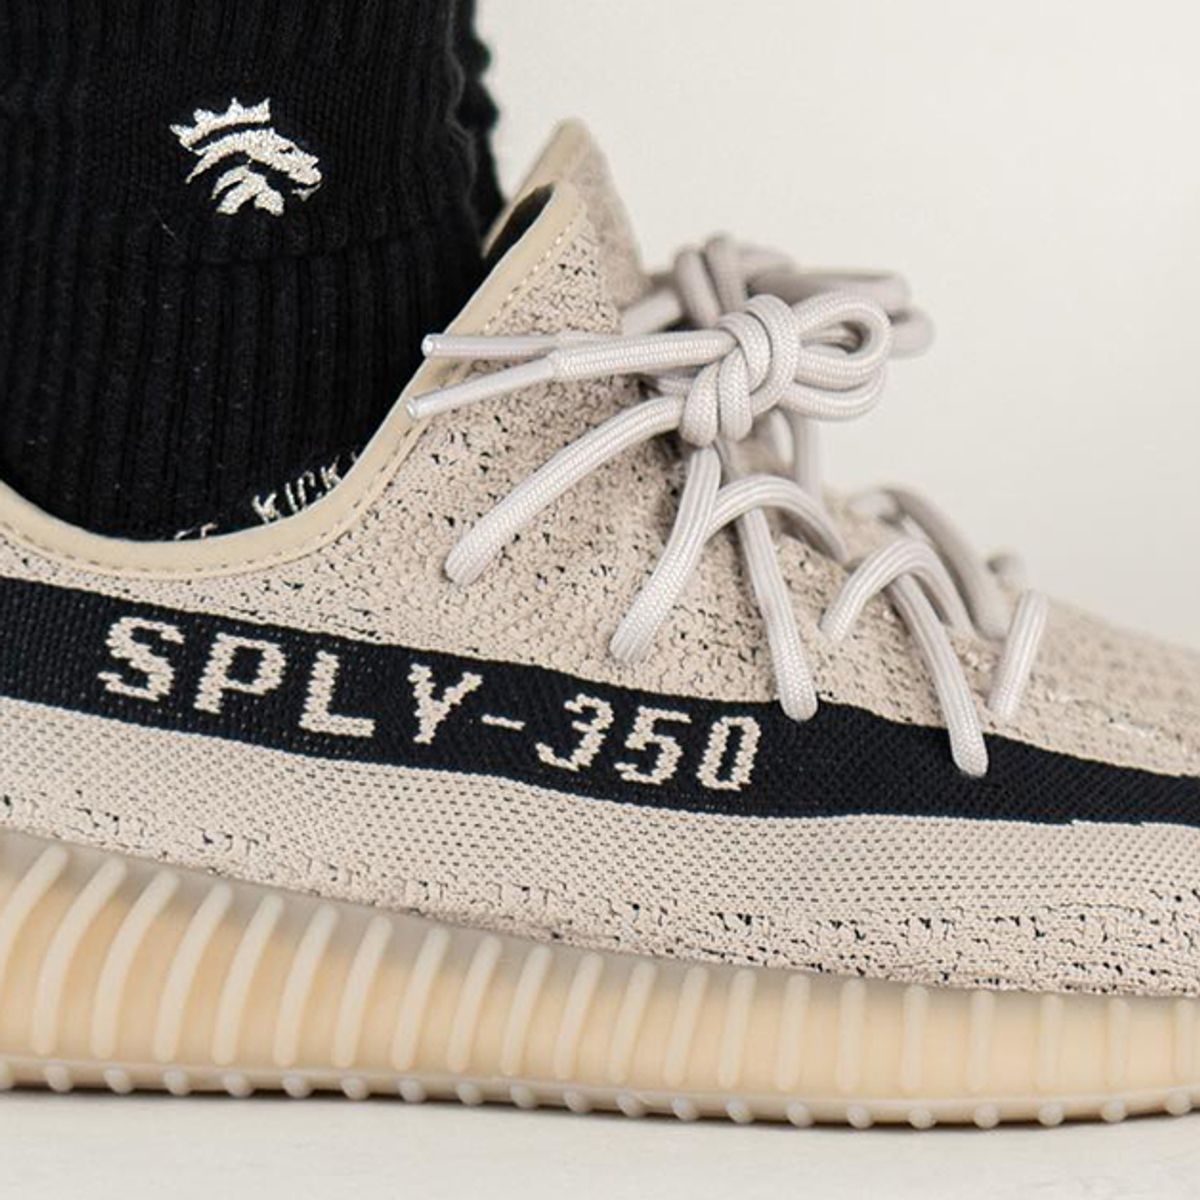 A Closer Look at the adidas Yeezy Boost 350 V2